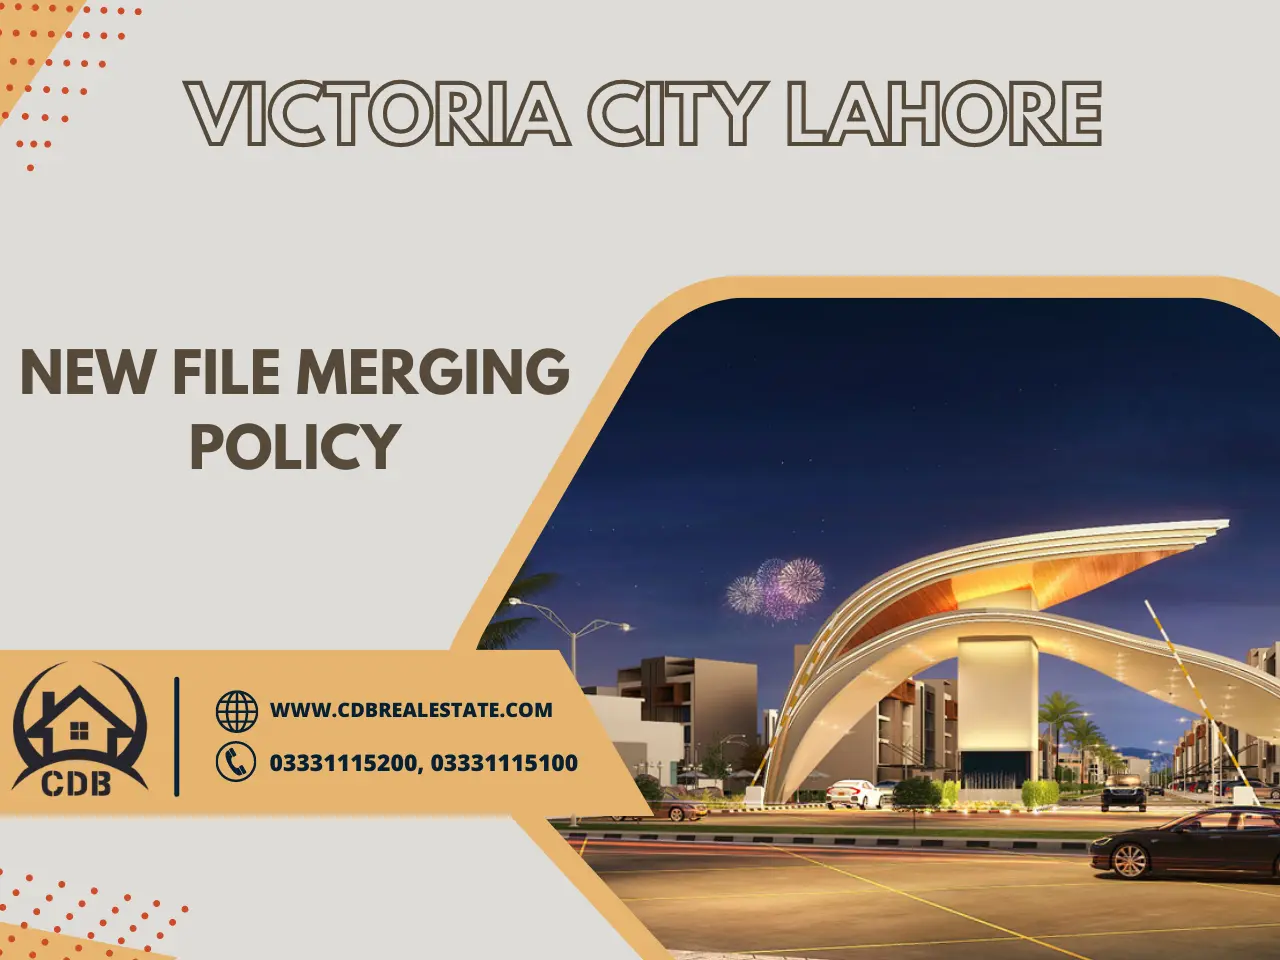 Victoria City Lahore New Merging Policy